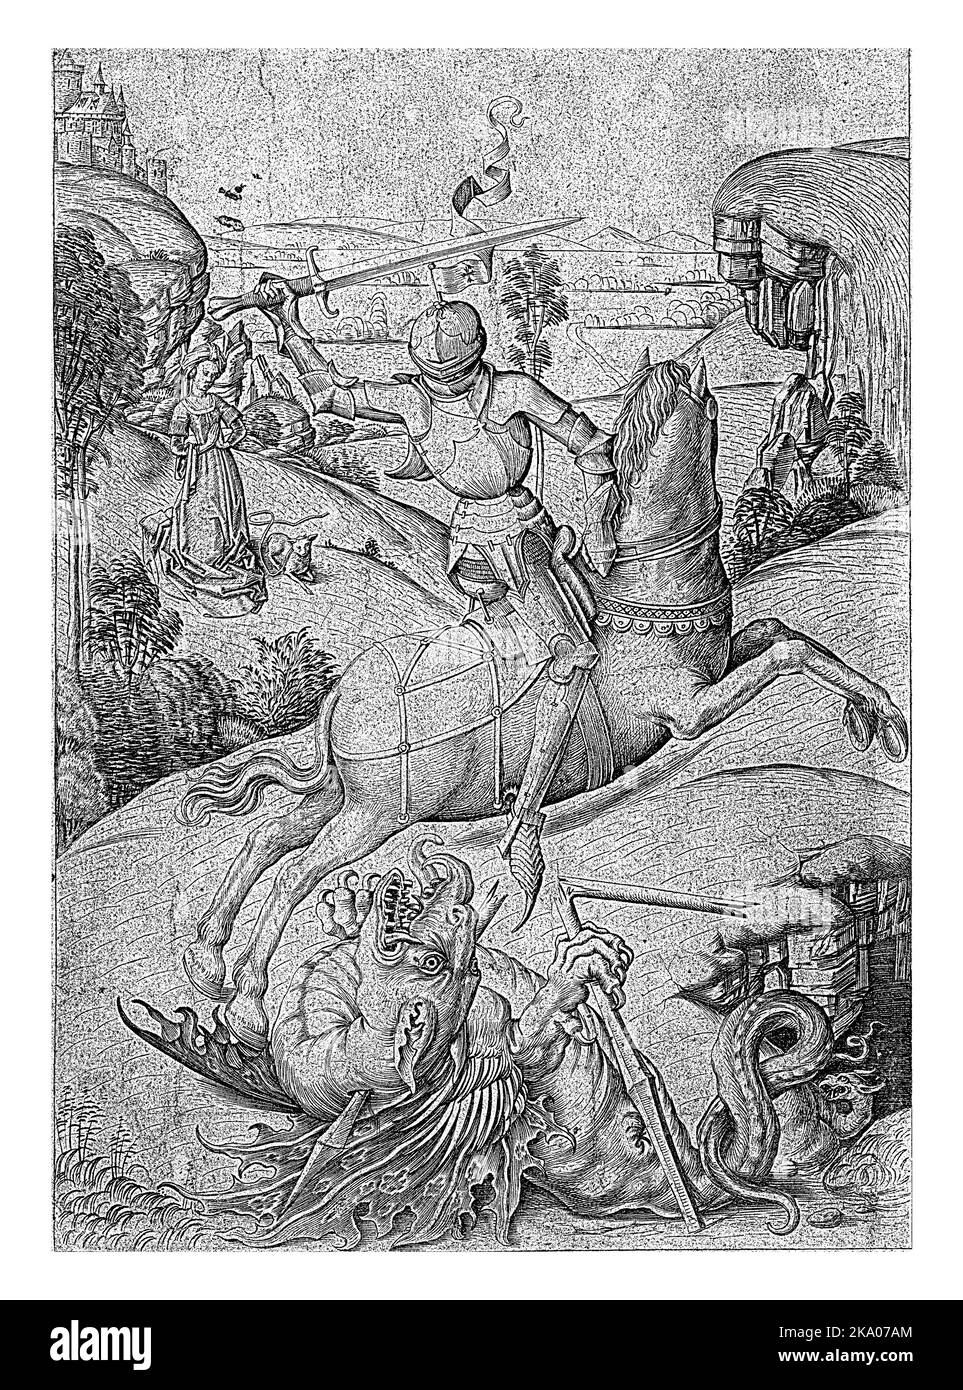 George on horseback with raised sword. Below him Dragon with broken lance. Landscape in background with woman and lamb. Stock Photo